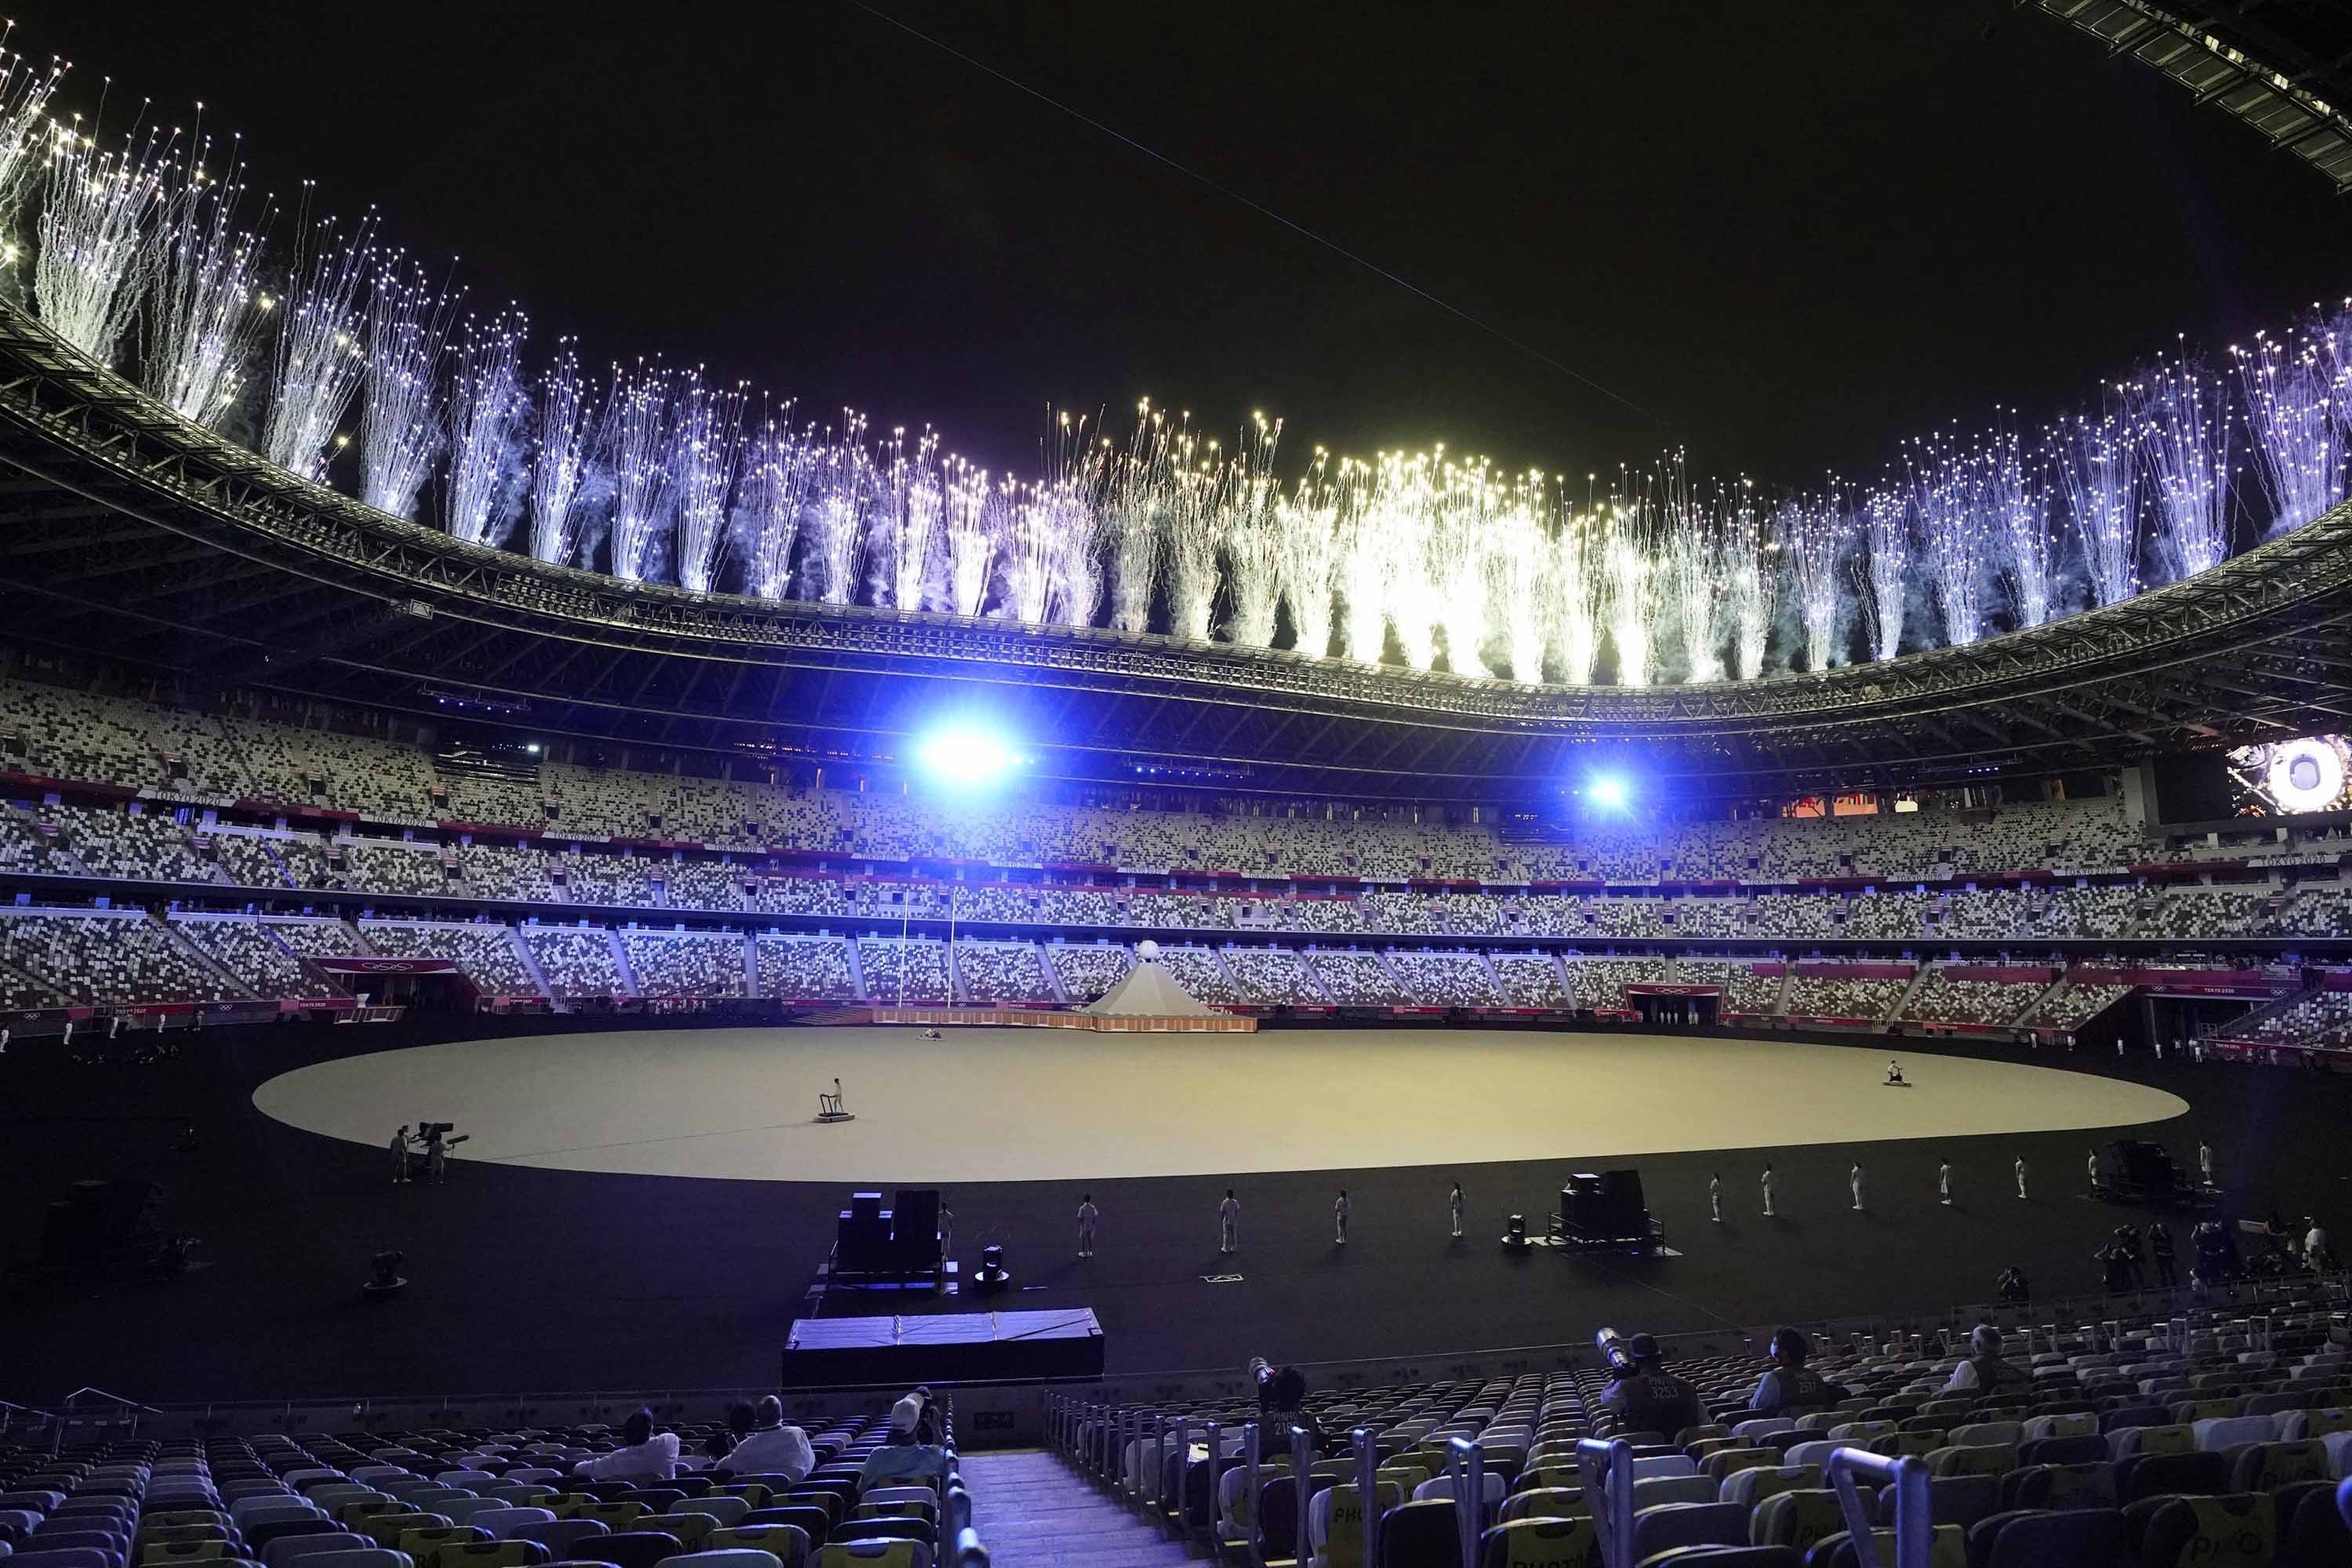 Fireworks soar above the National Stadium during the opening ceremony of the Tokyo Olympics on July 23, 2021, in Tokyo. (Photo by Kyodo News via Getty Images)